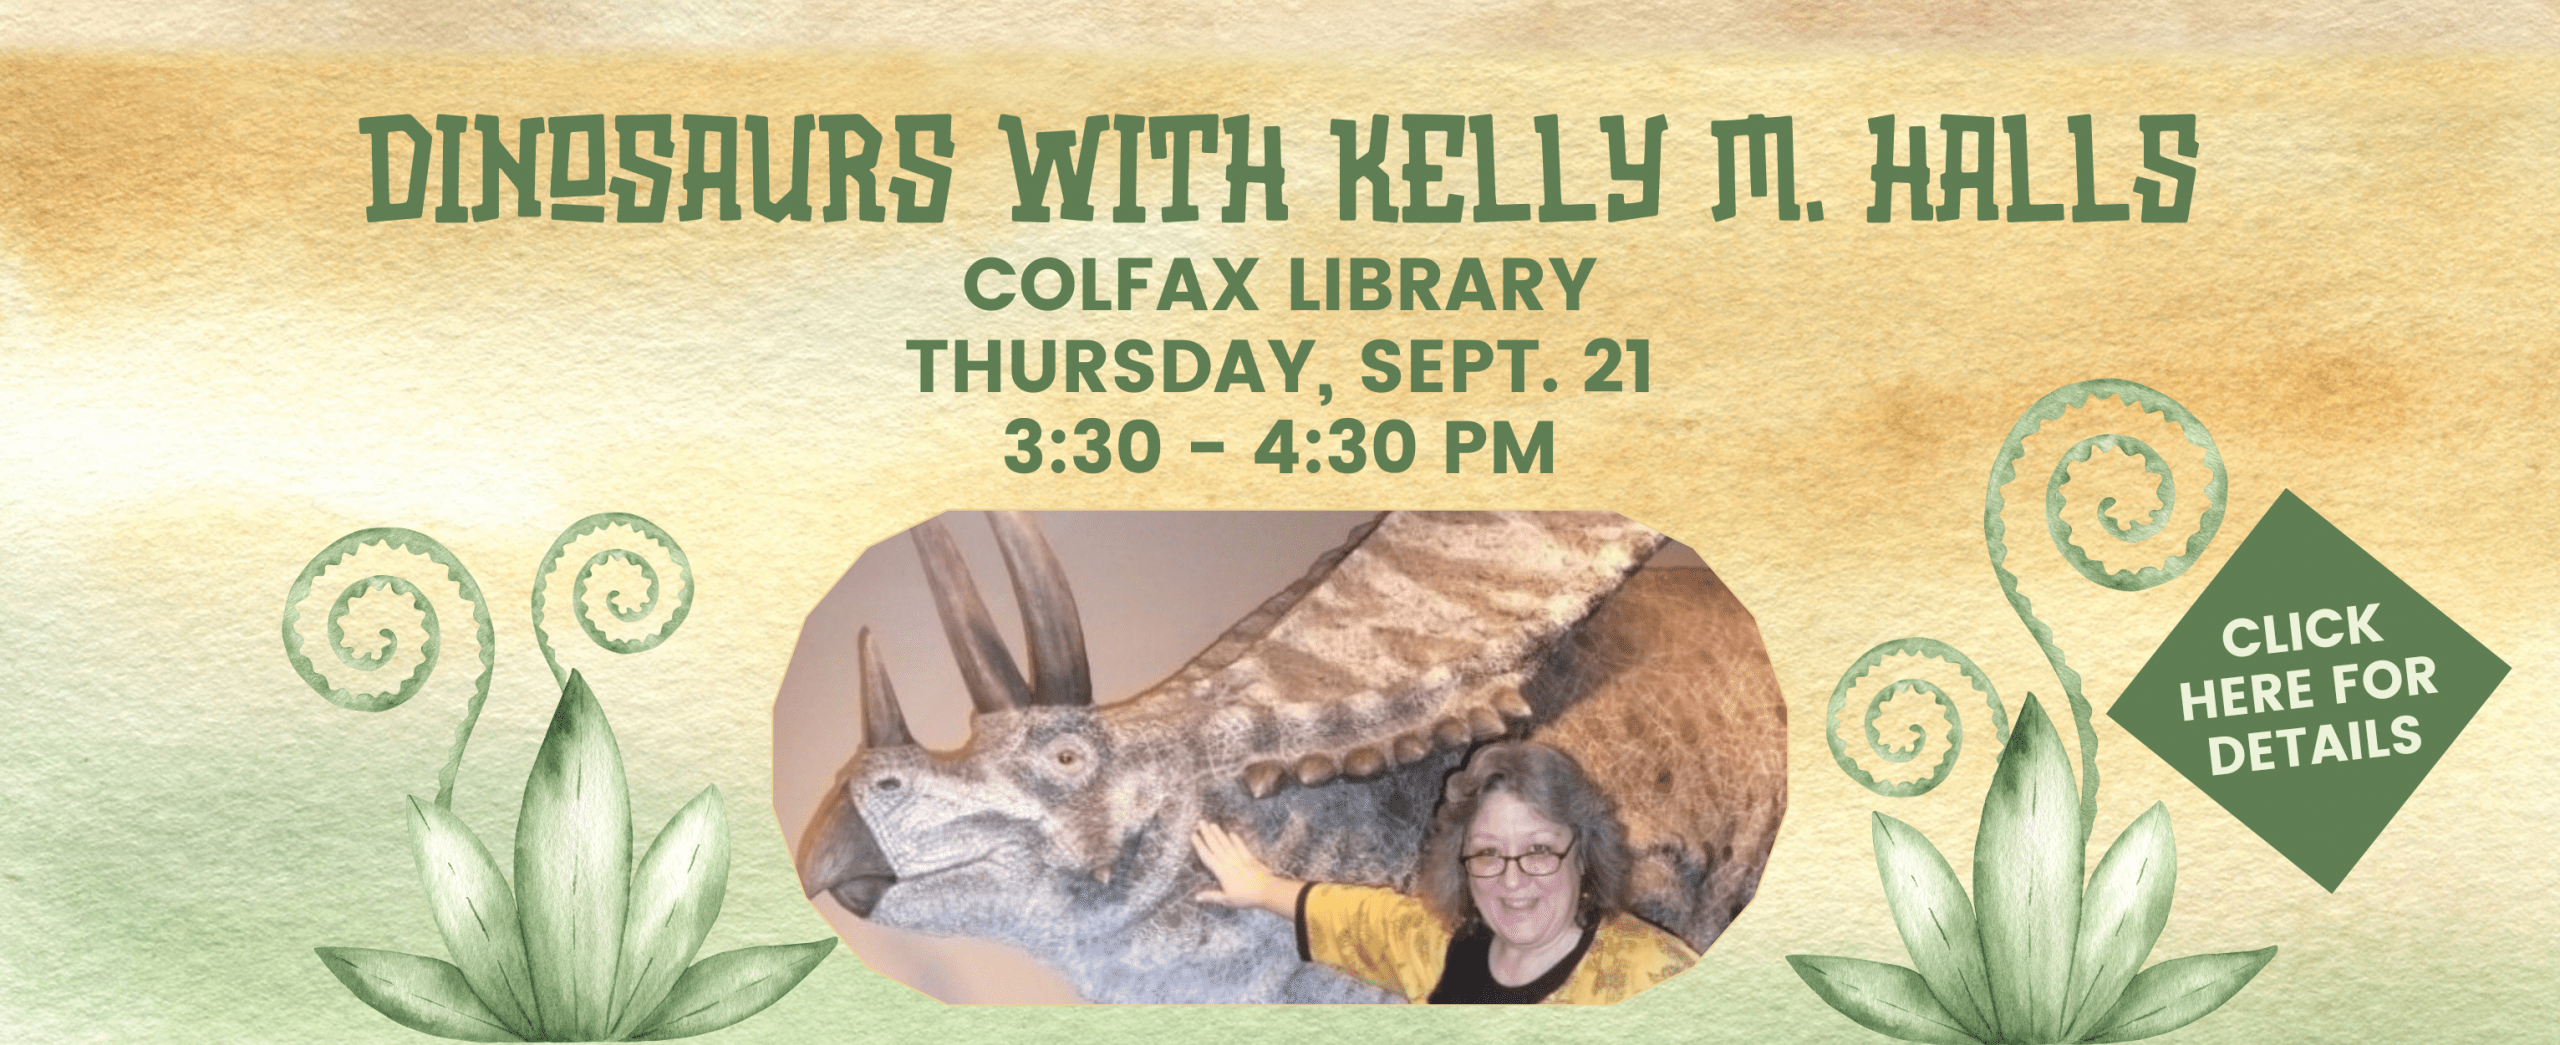 Notable author Kelly Milner Halls is in Colfax for a special dinosaur program on Thursday, Sept. 21 at 3:30 PM. Click here for details.